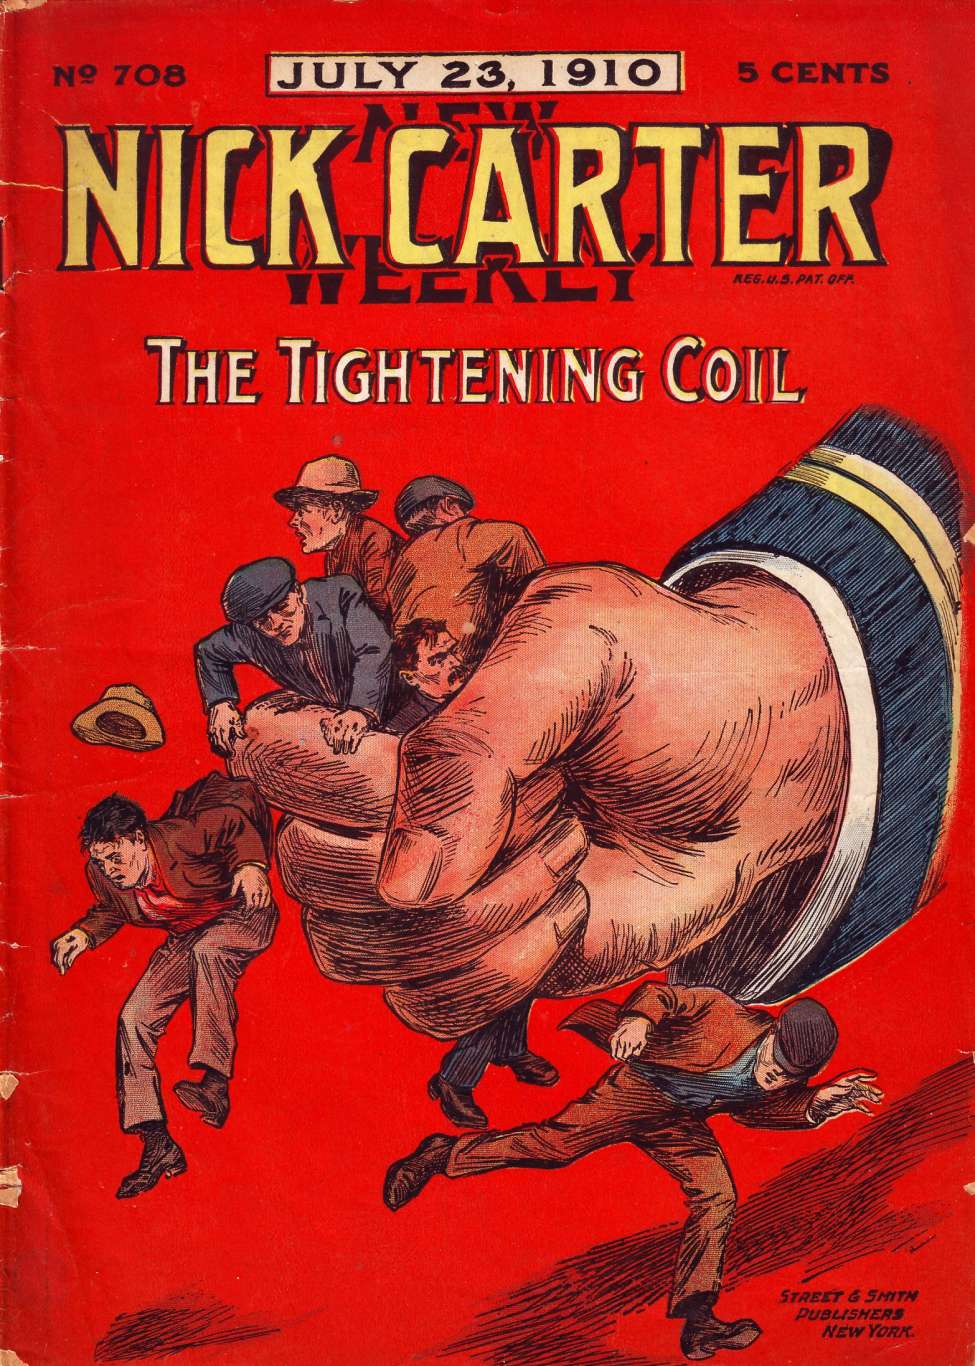 Book Cover For New Nick Carter Weekly 708 - The Tightening Coil